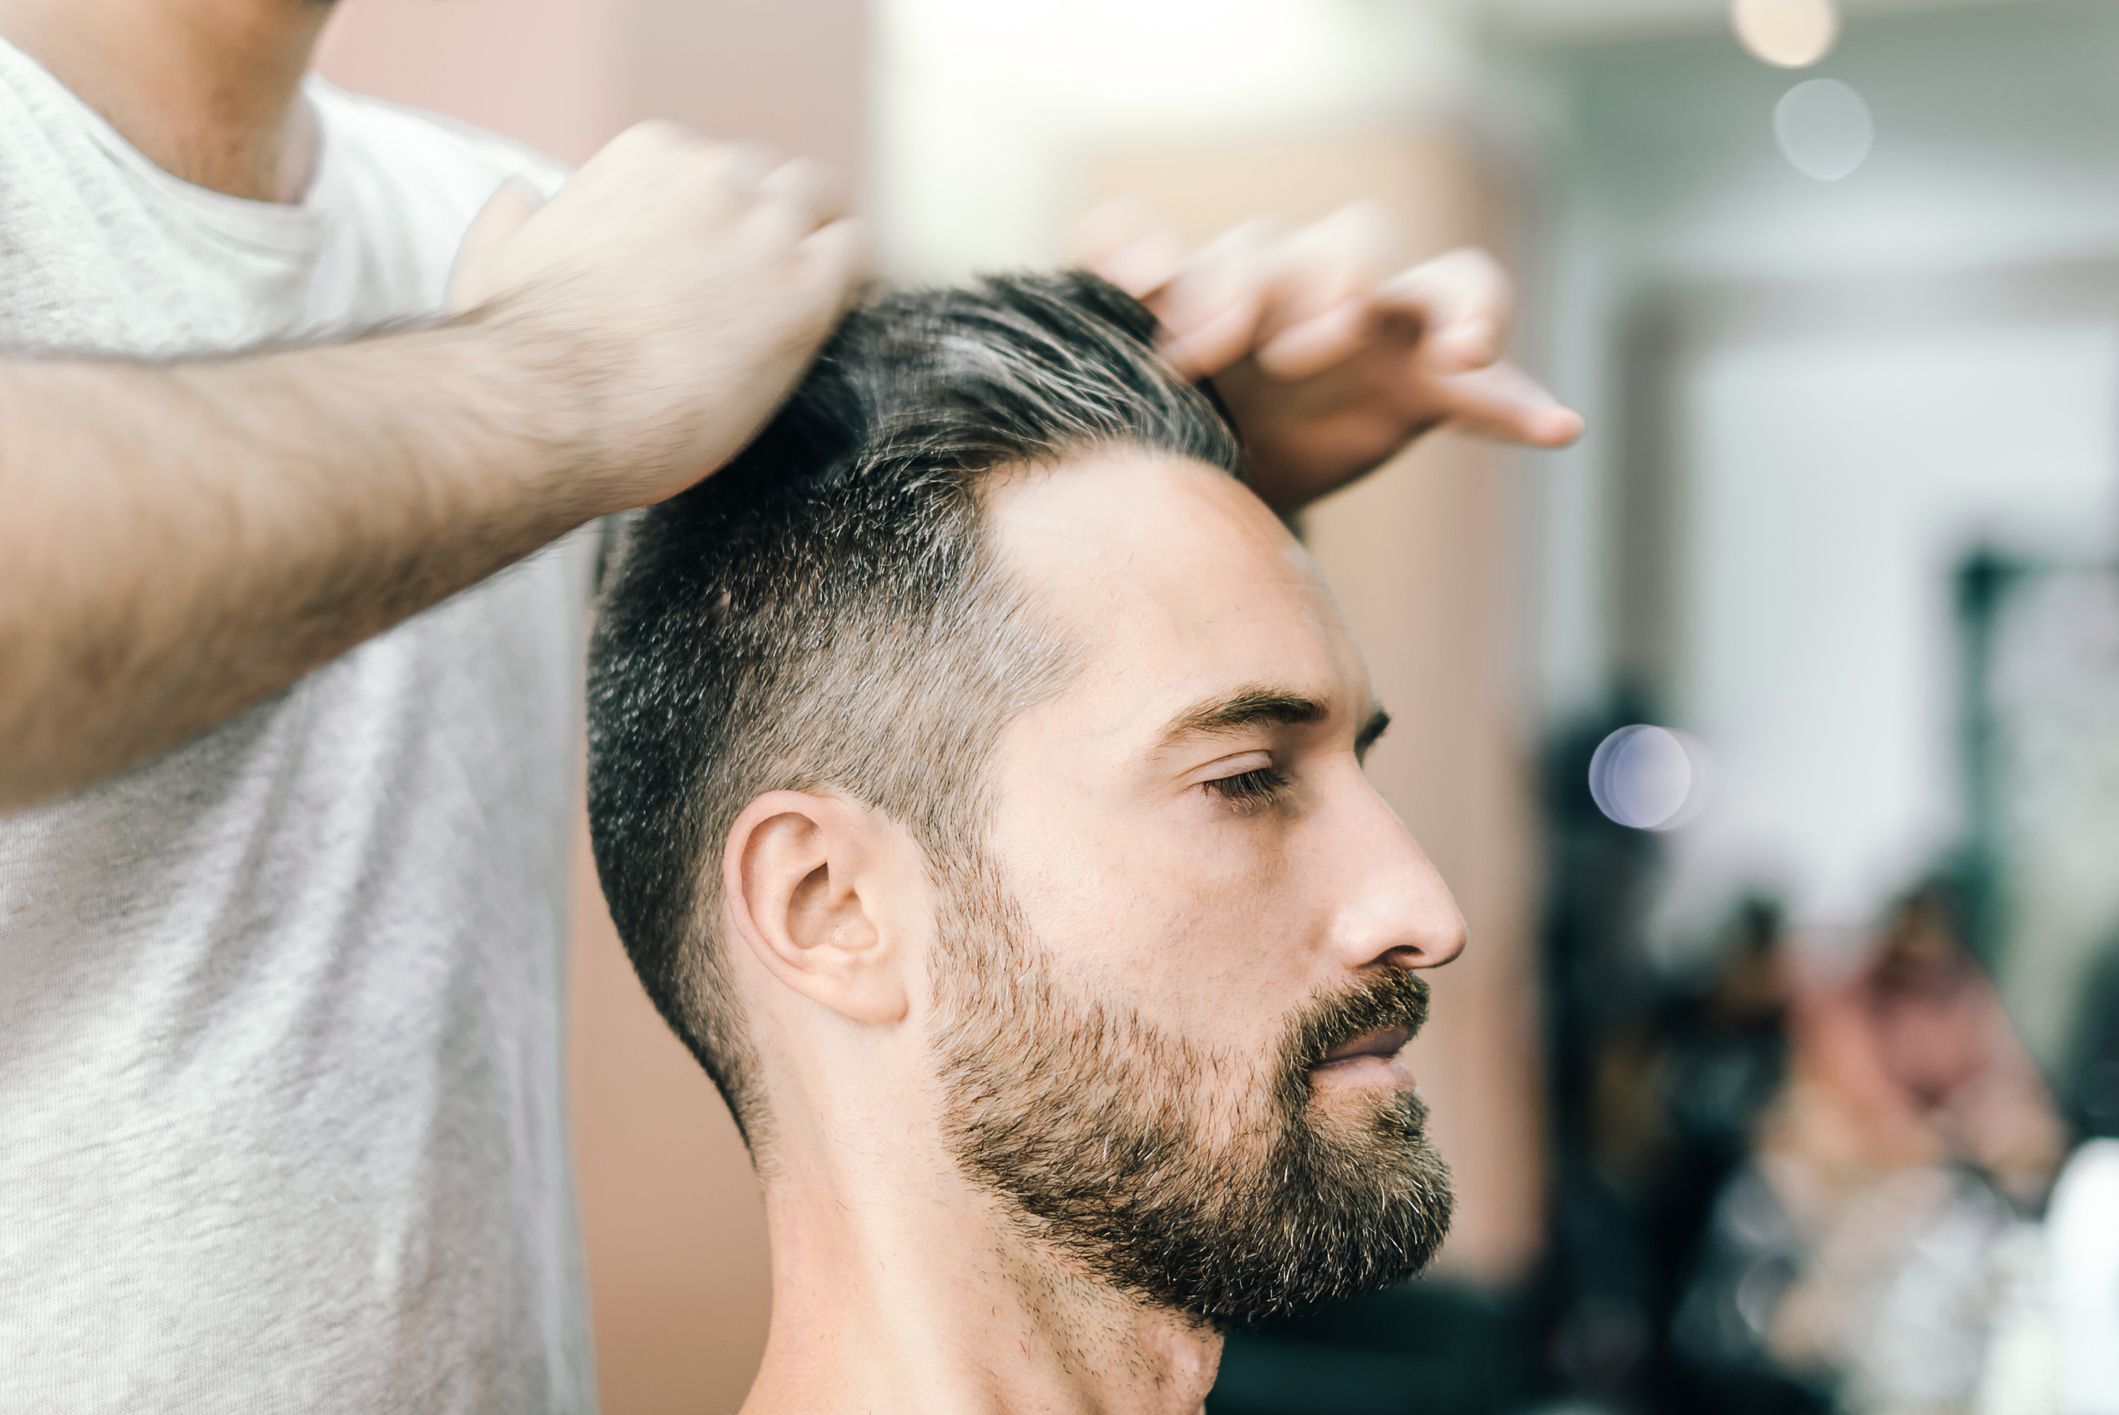 How to get long hair for guys? 14 tips to get long, healthy and strong hair  for men | India.com